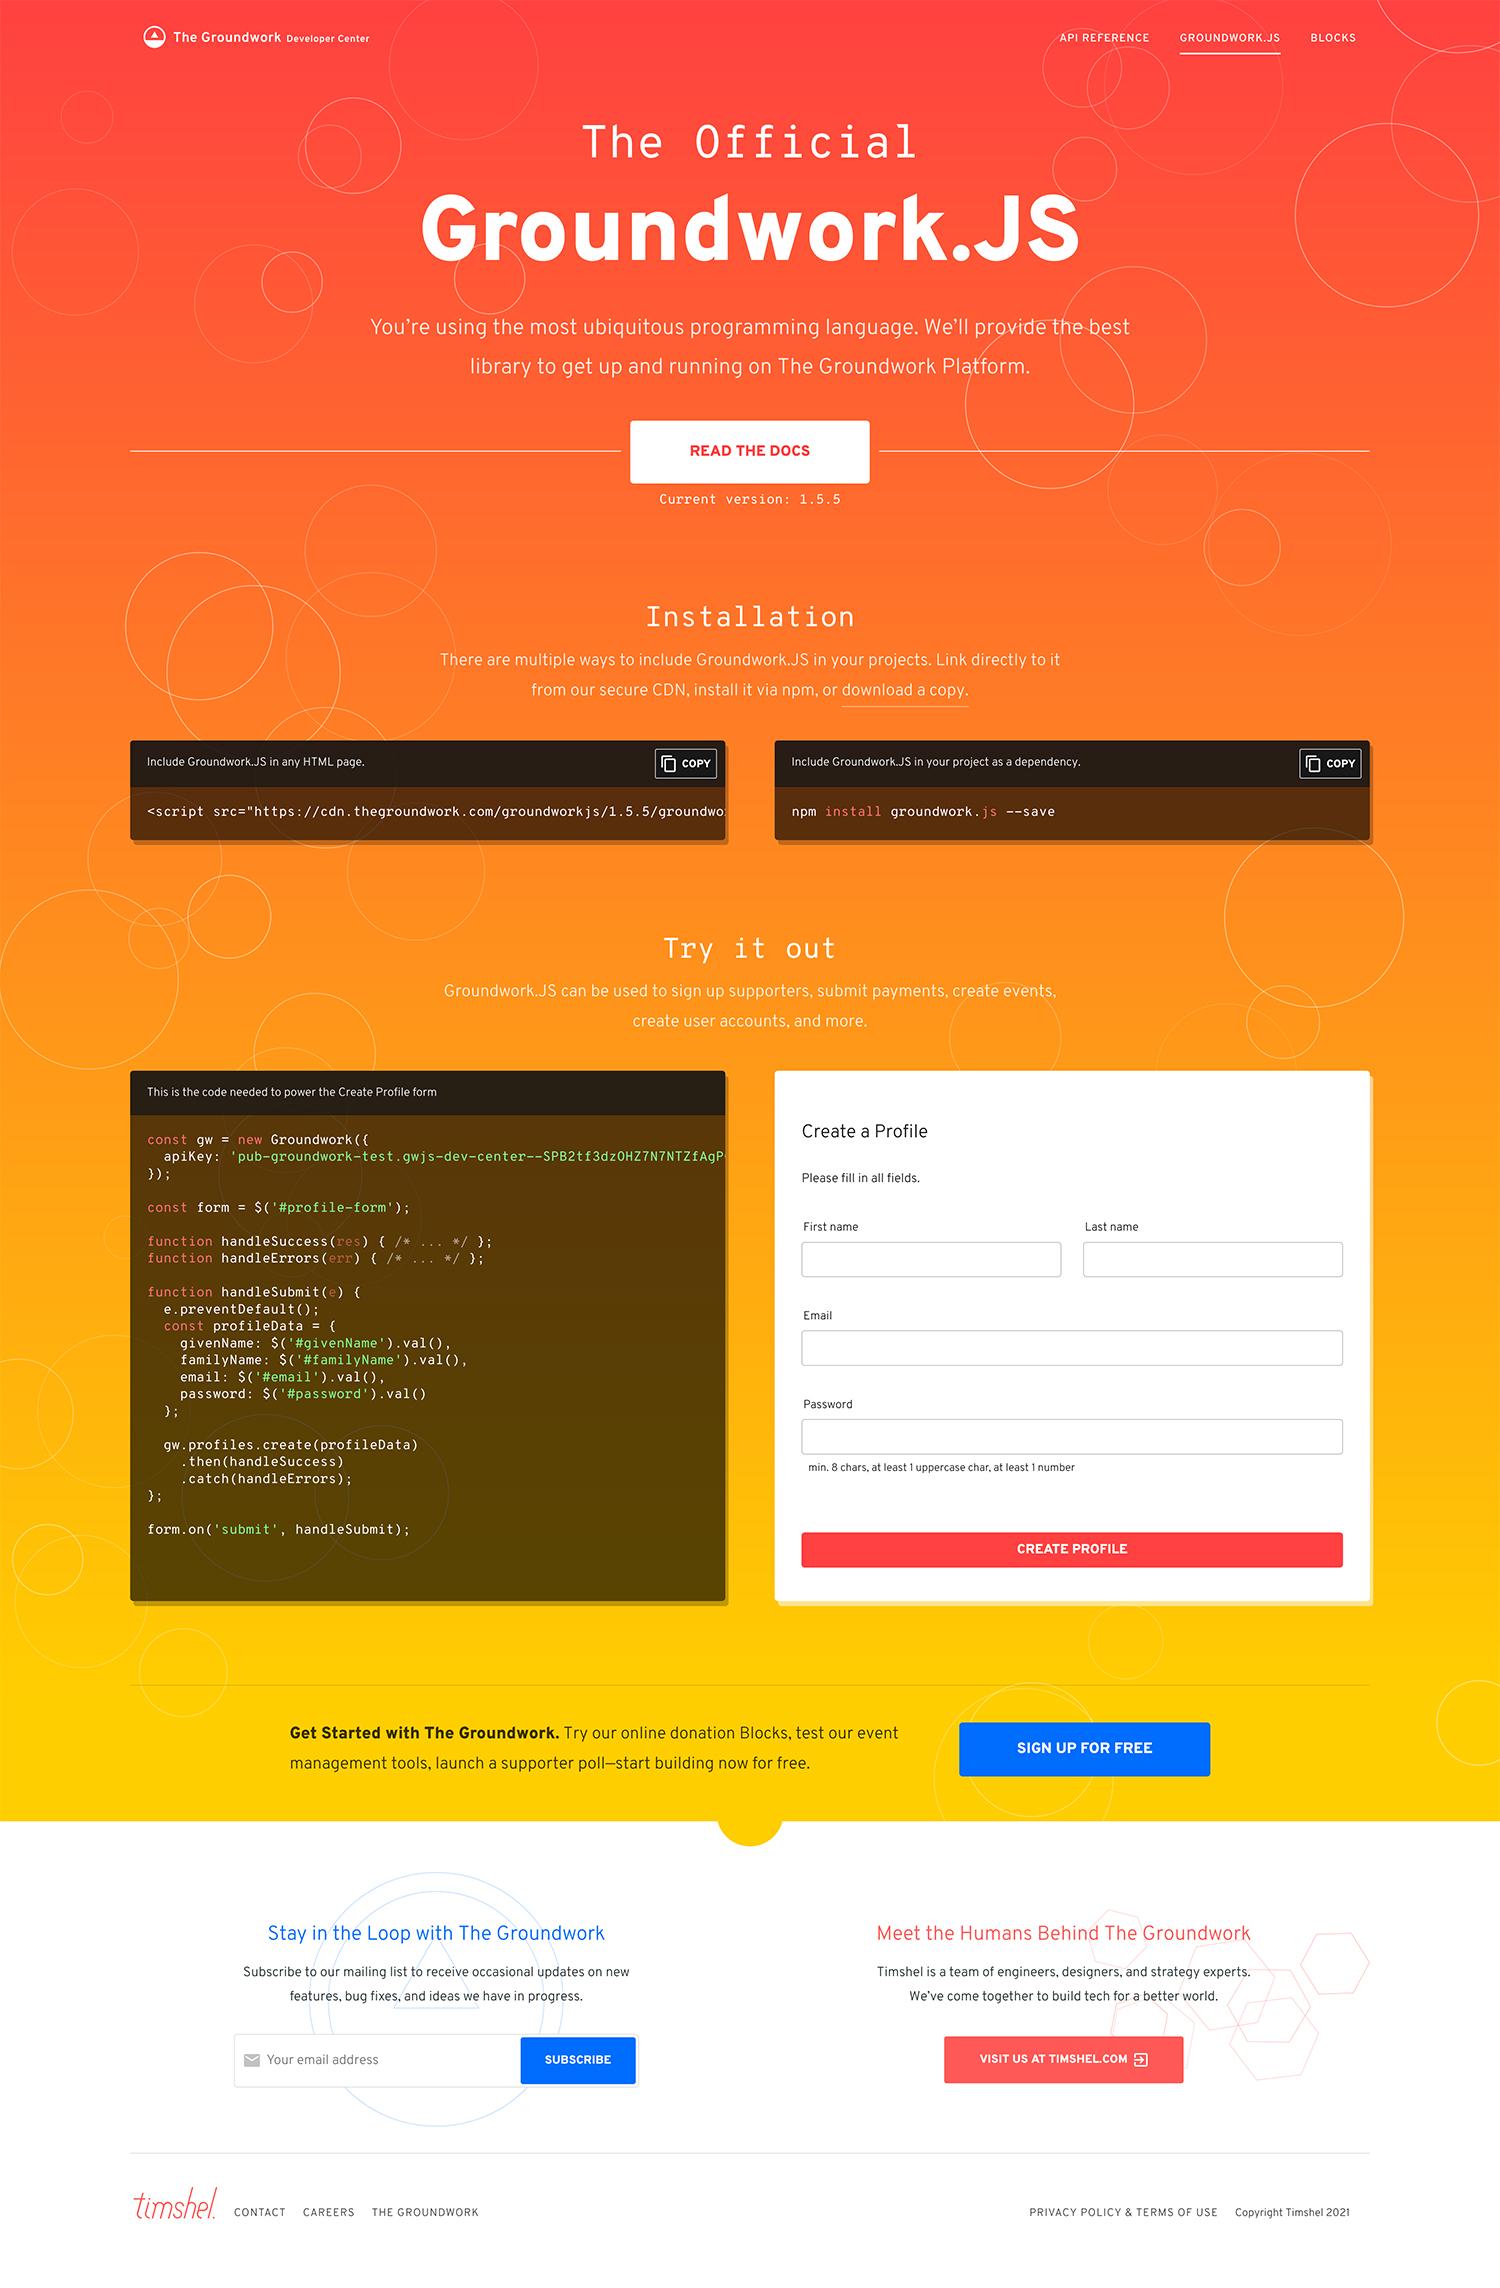 A screenshot of the GroundworkJS page of developer.thegroundwork.com